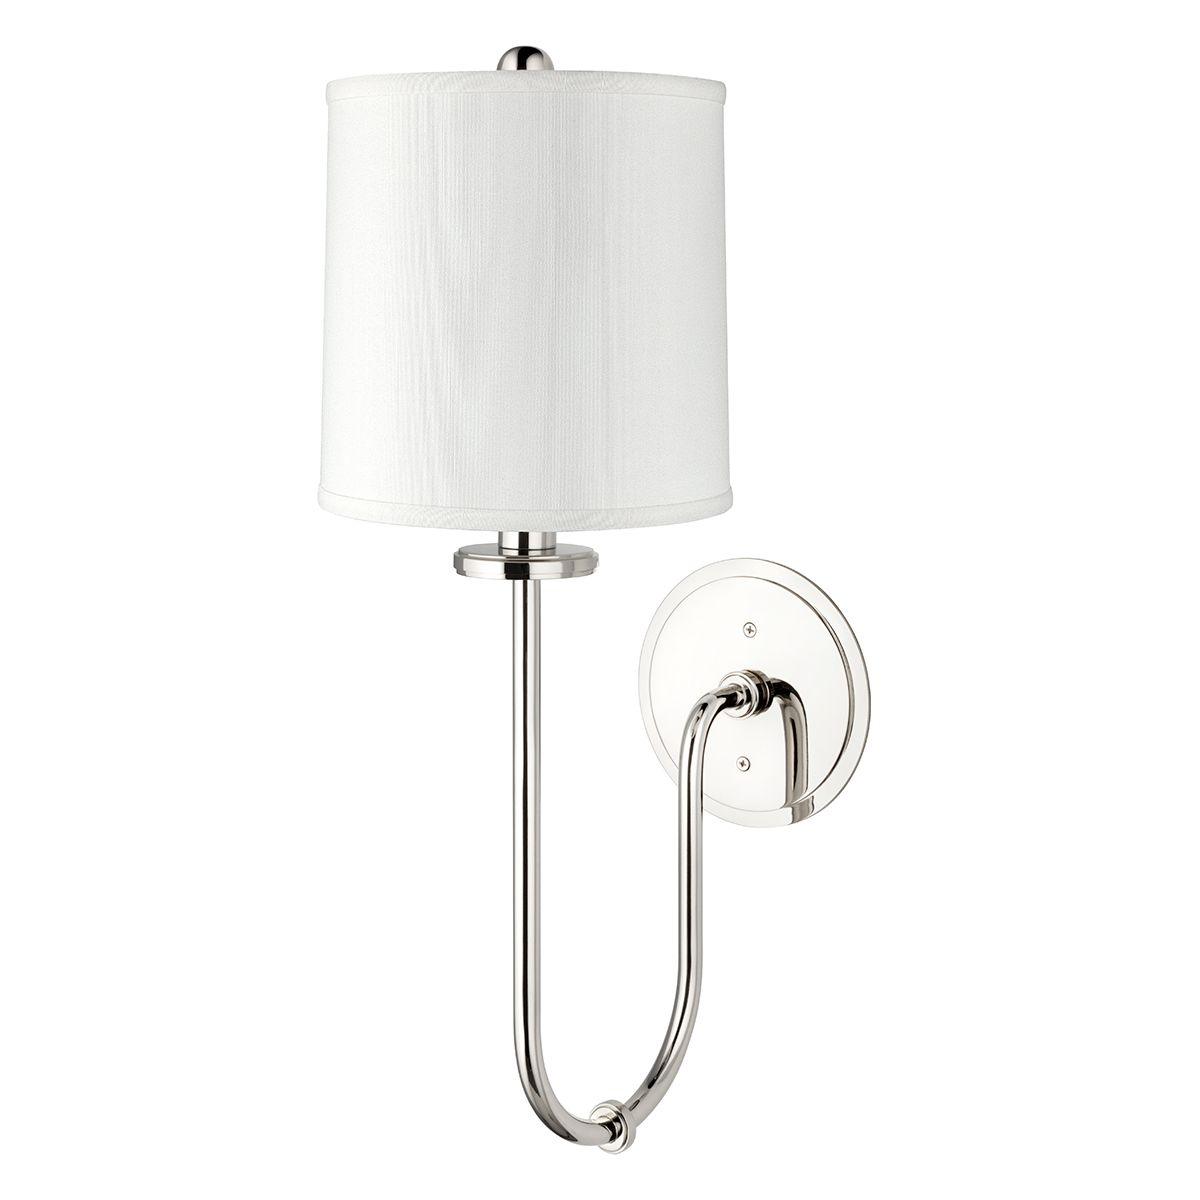 Jericho 21 in. Armed Sconce